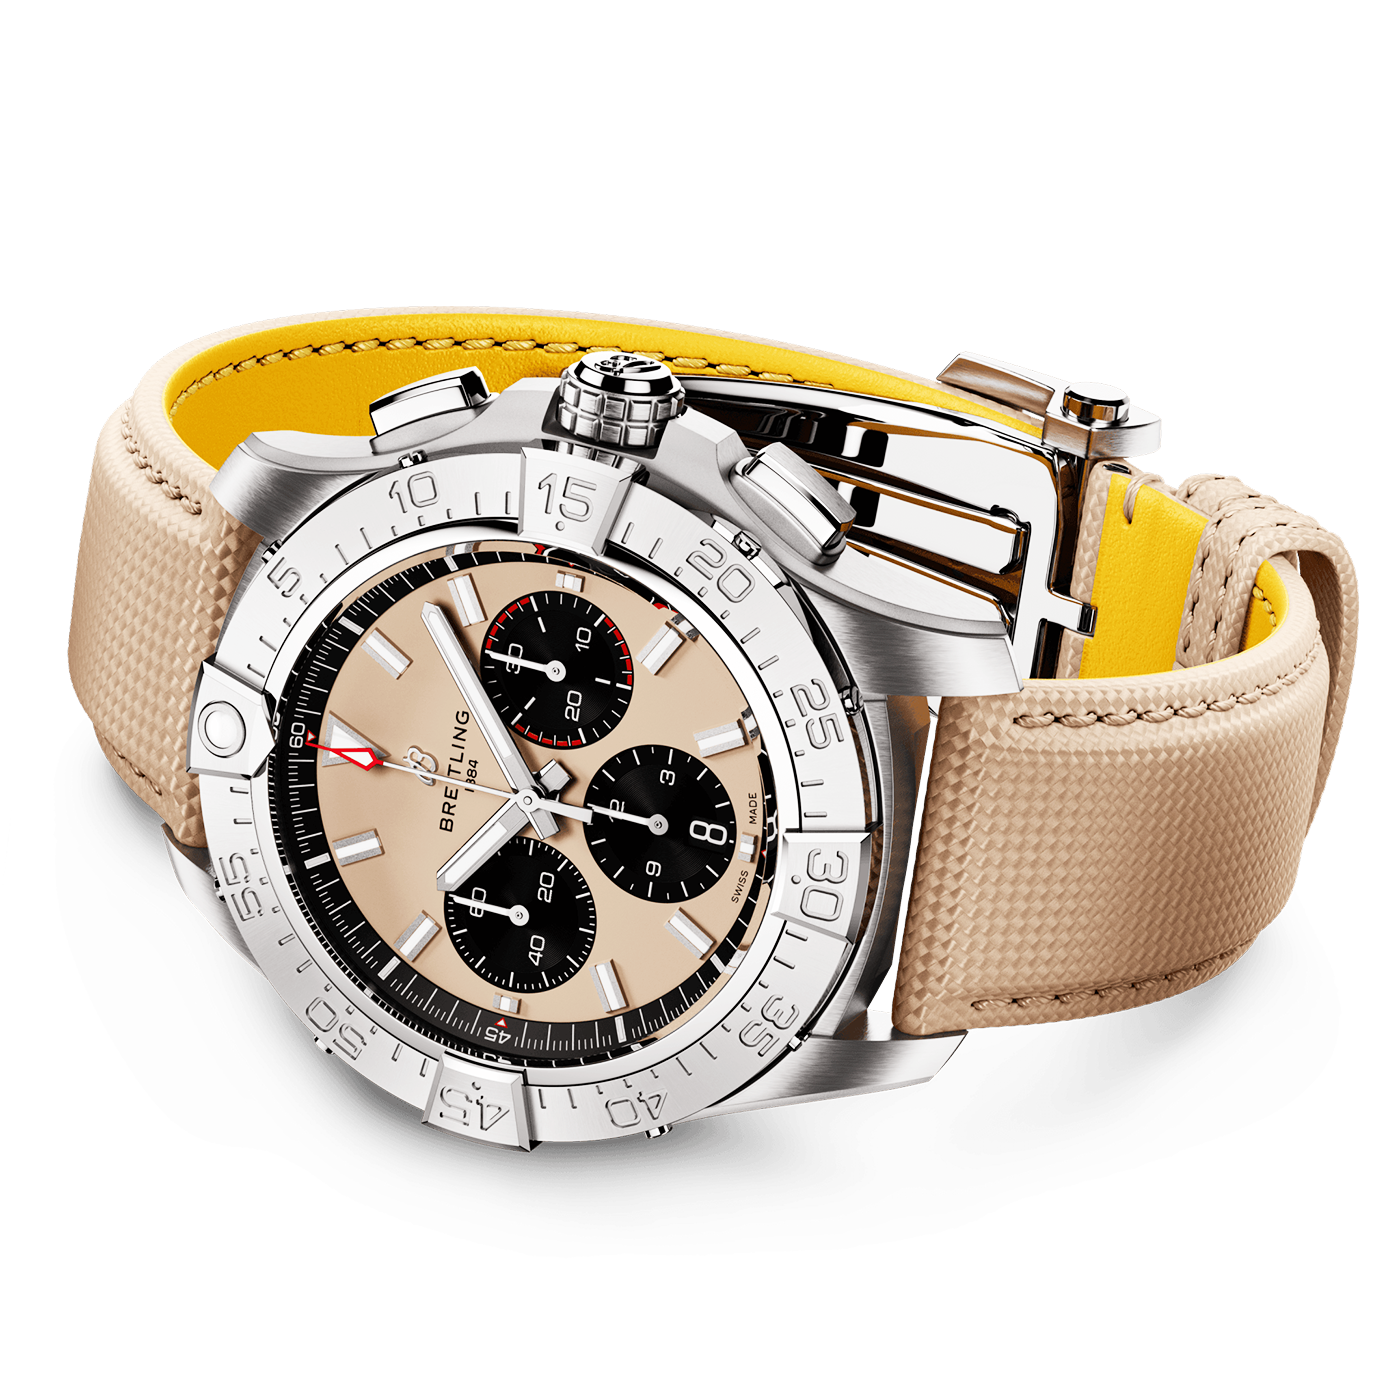 Avenger 44mm Sand Dial Automatic Chronograph Strap Watch